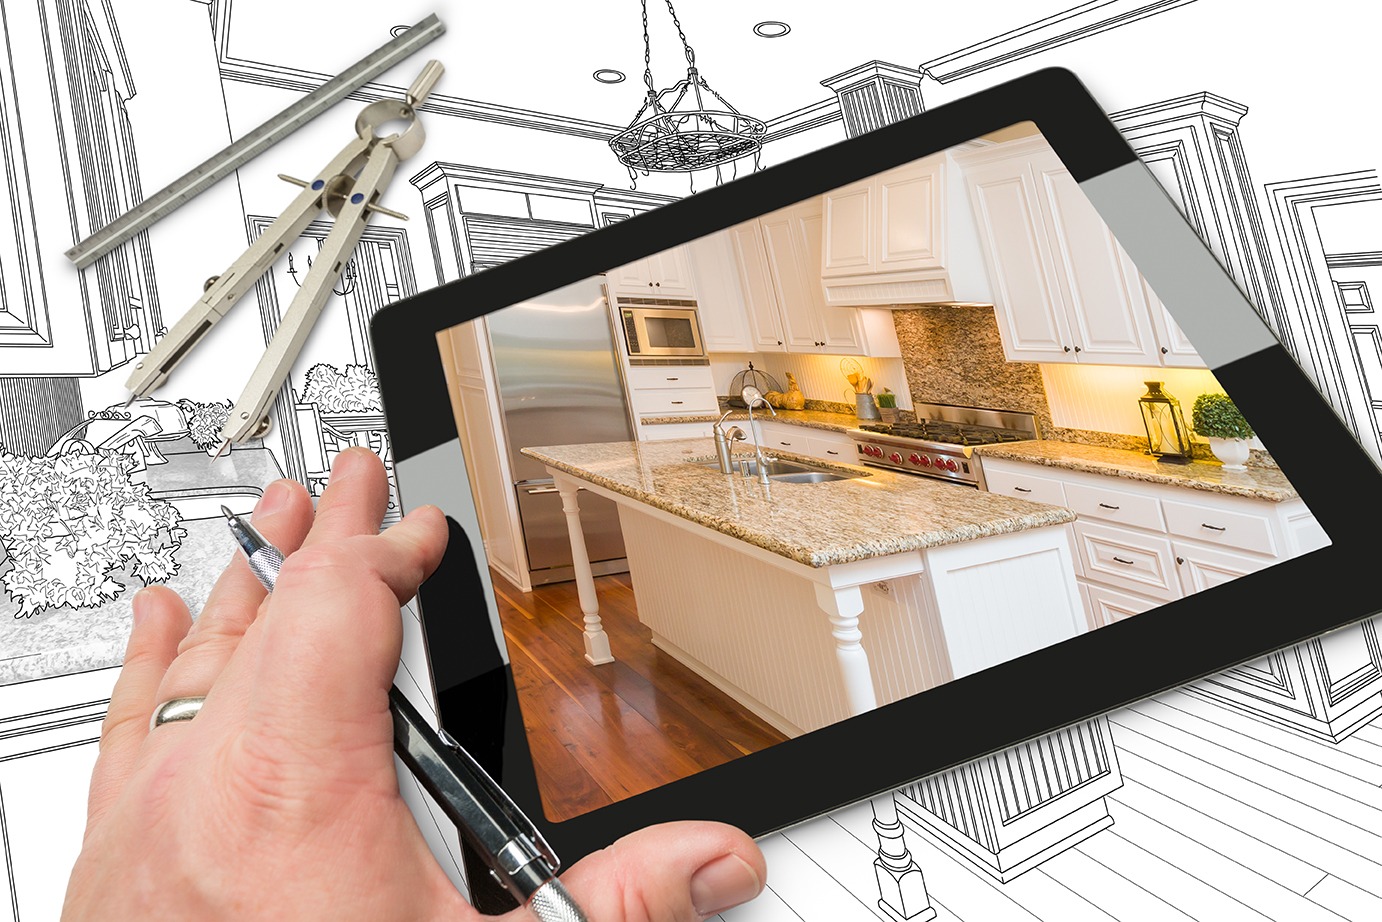 Hand of Architect on Computer Tablet Showing Photo of Kitchen Drawing Behind with Compass and Ruler.